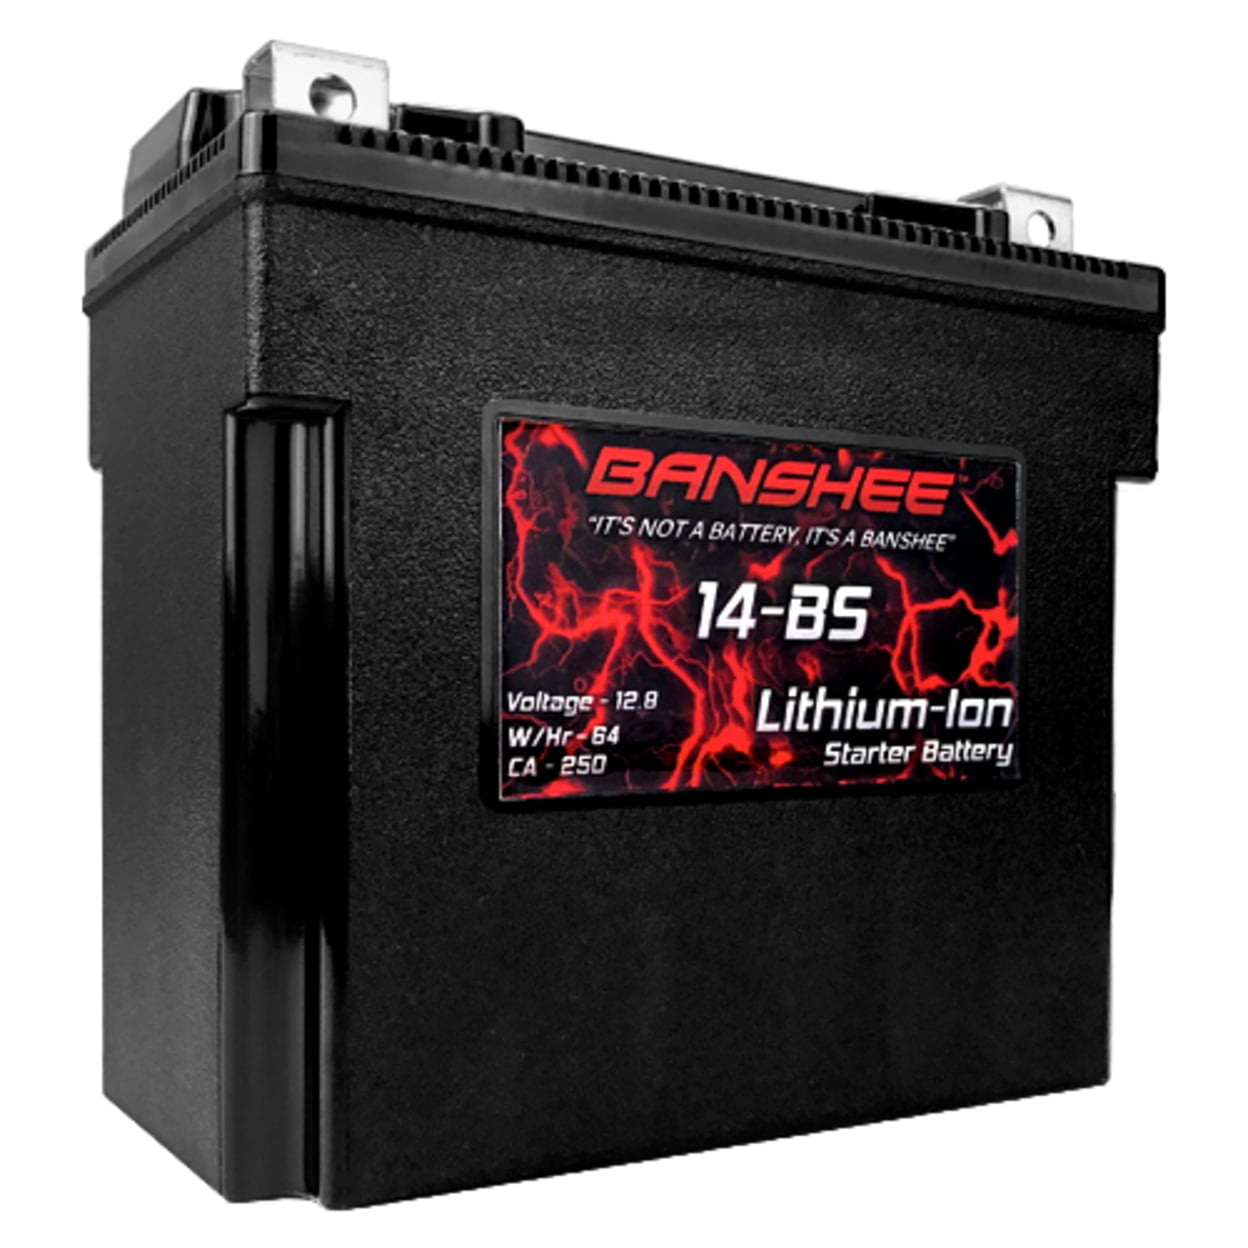 Picture of Banshee DLFP14-BS-02 12.8V Lithium-ion Ion Battery for Replacement YTX14-BS for Honda VTX 1300 S 12V Motorcycle